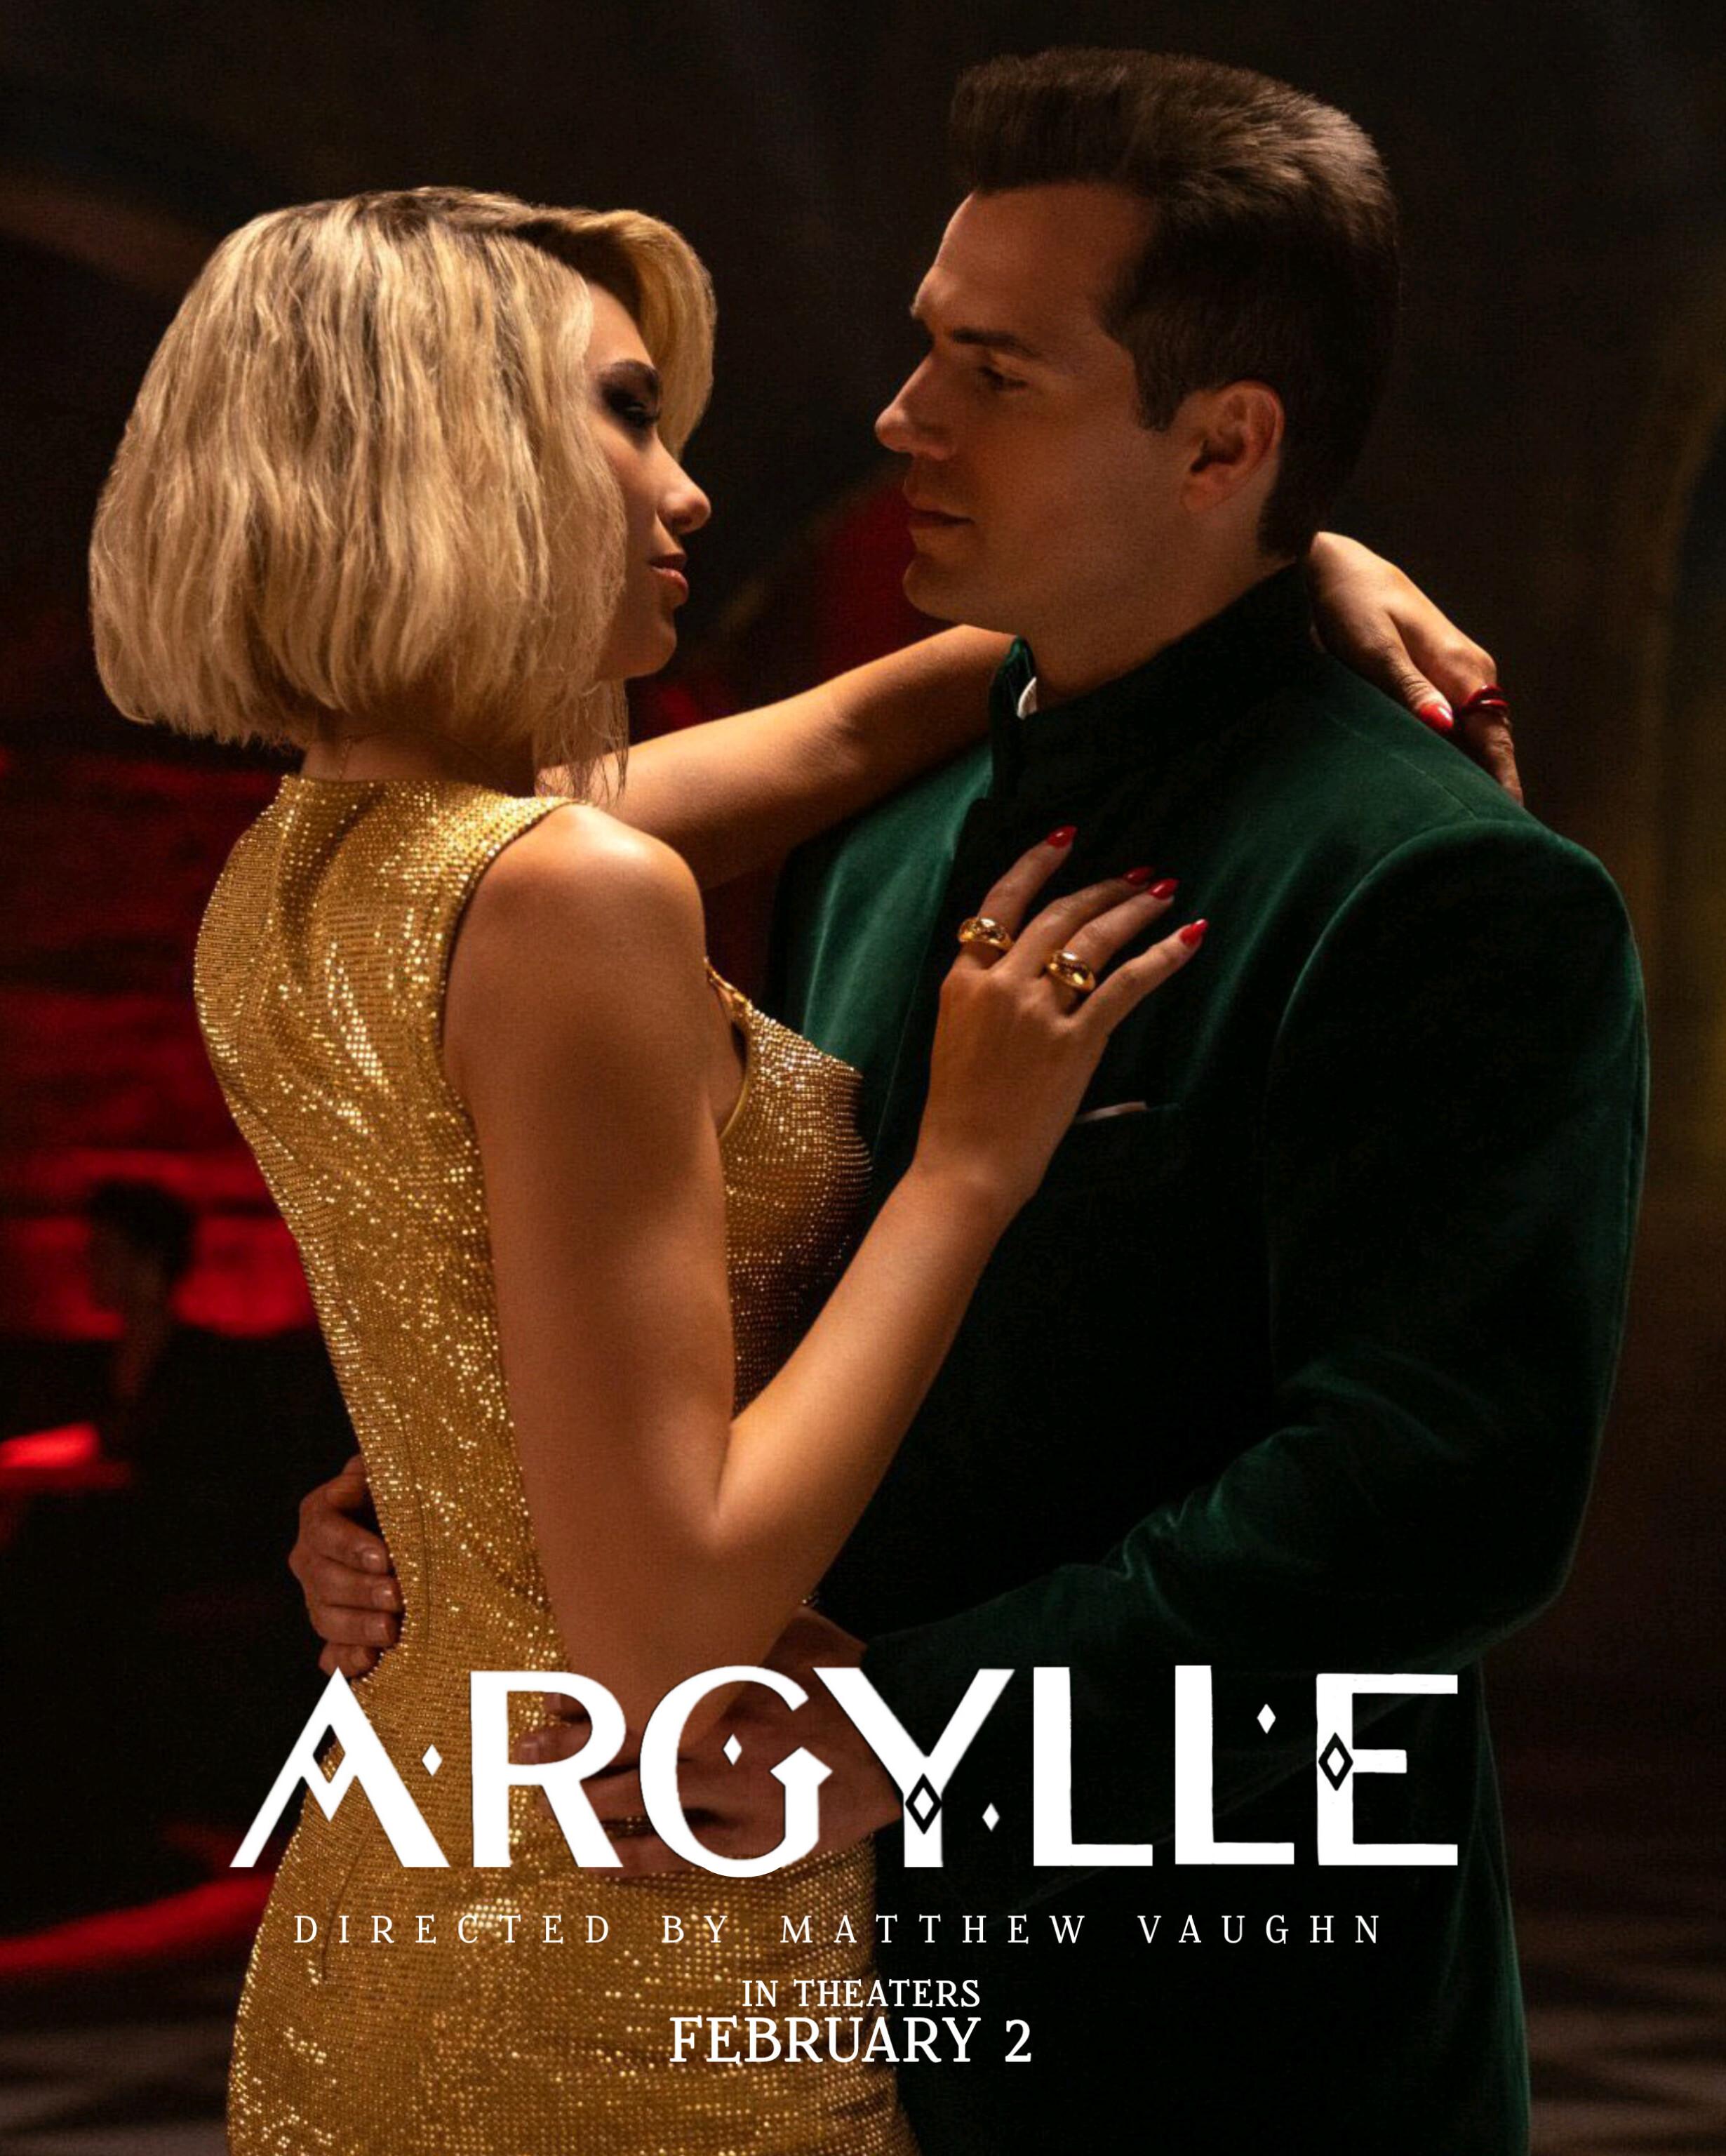 Argylle - March 5 - Available to buy and rent on Apple TV+Argylle, directed by Matthew Vaughn, is a high-octane spy action comedy that delves into the intricate world of espionage. The plot centers on Elly Conway, portrayed by Bryce Dallas Howard, a reclusive author whose fictional spy stories begin merging with reality. The film promises a dizzying conspiracy of deceit, double agents, and a quest involving a mysterious Masterkey, leading to a globe-trotting adventure.